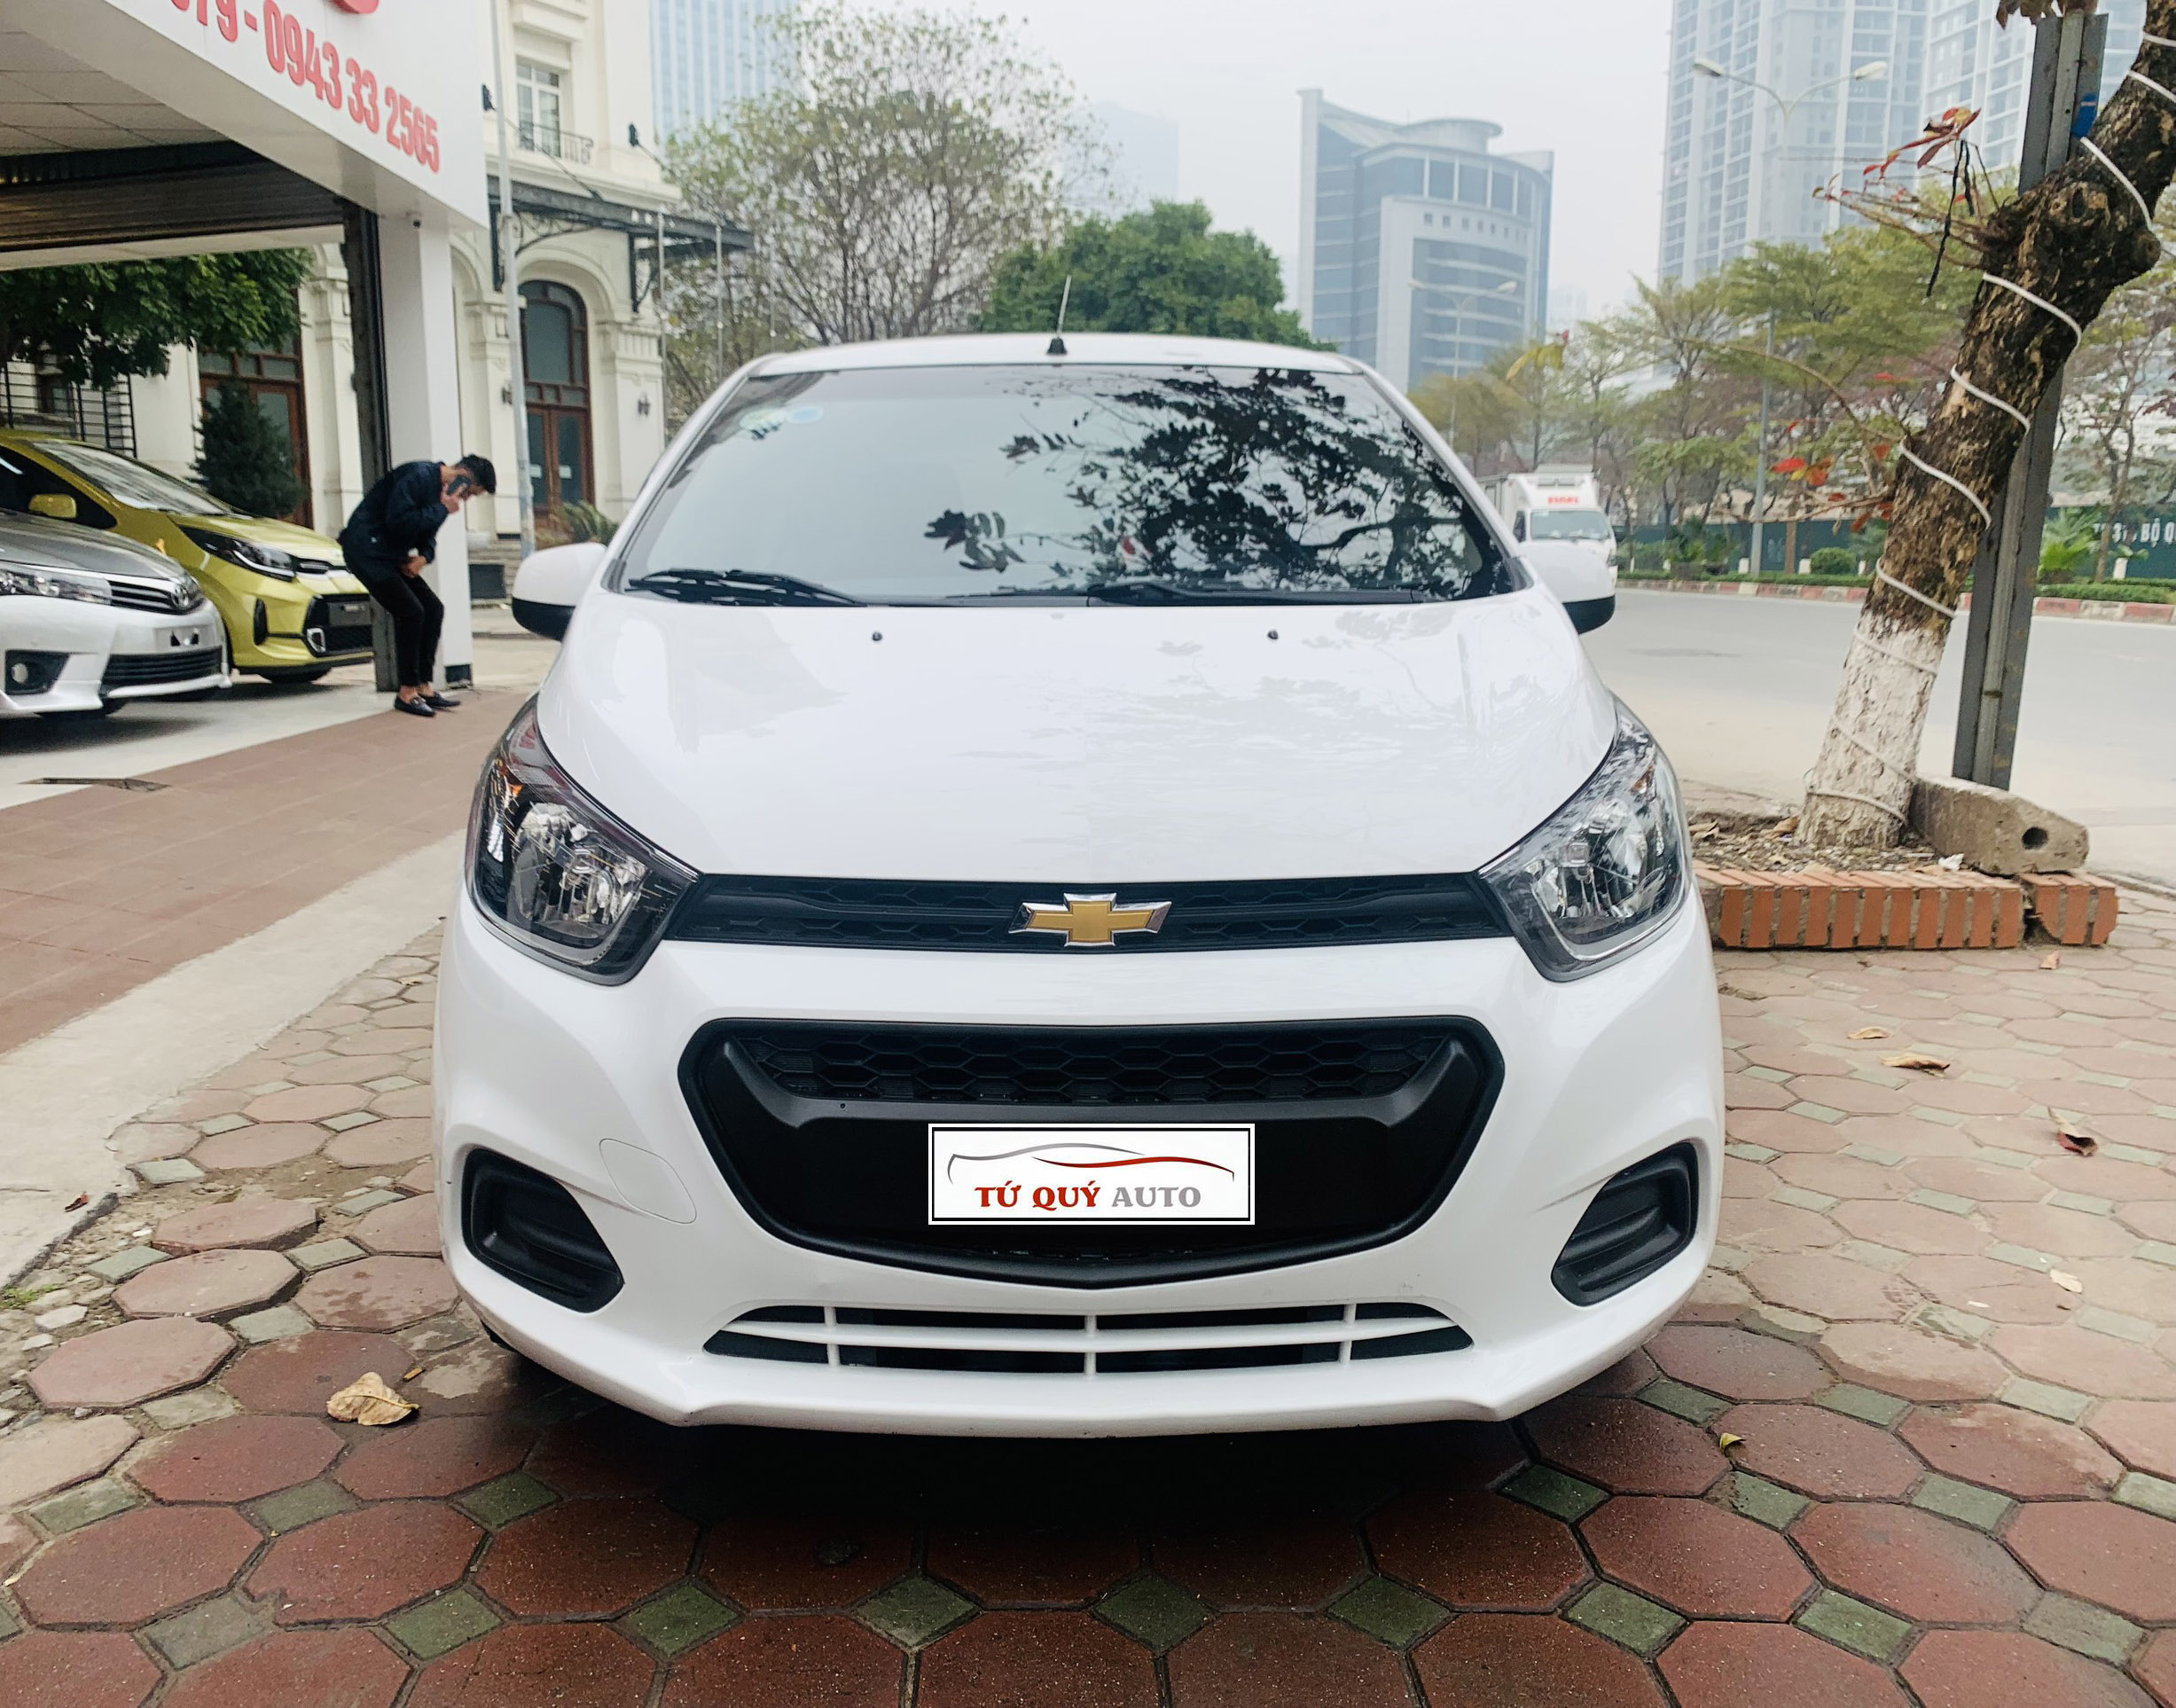 2018 Chevrolet Spark Chevy Review Ratings Specs Prices and Photos   The Car Connection